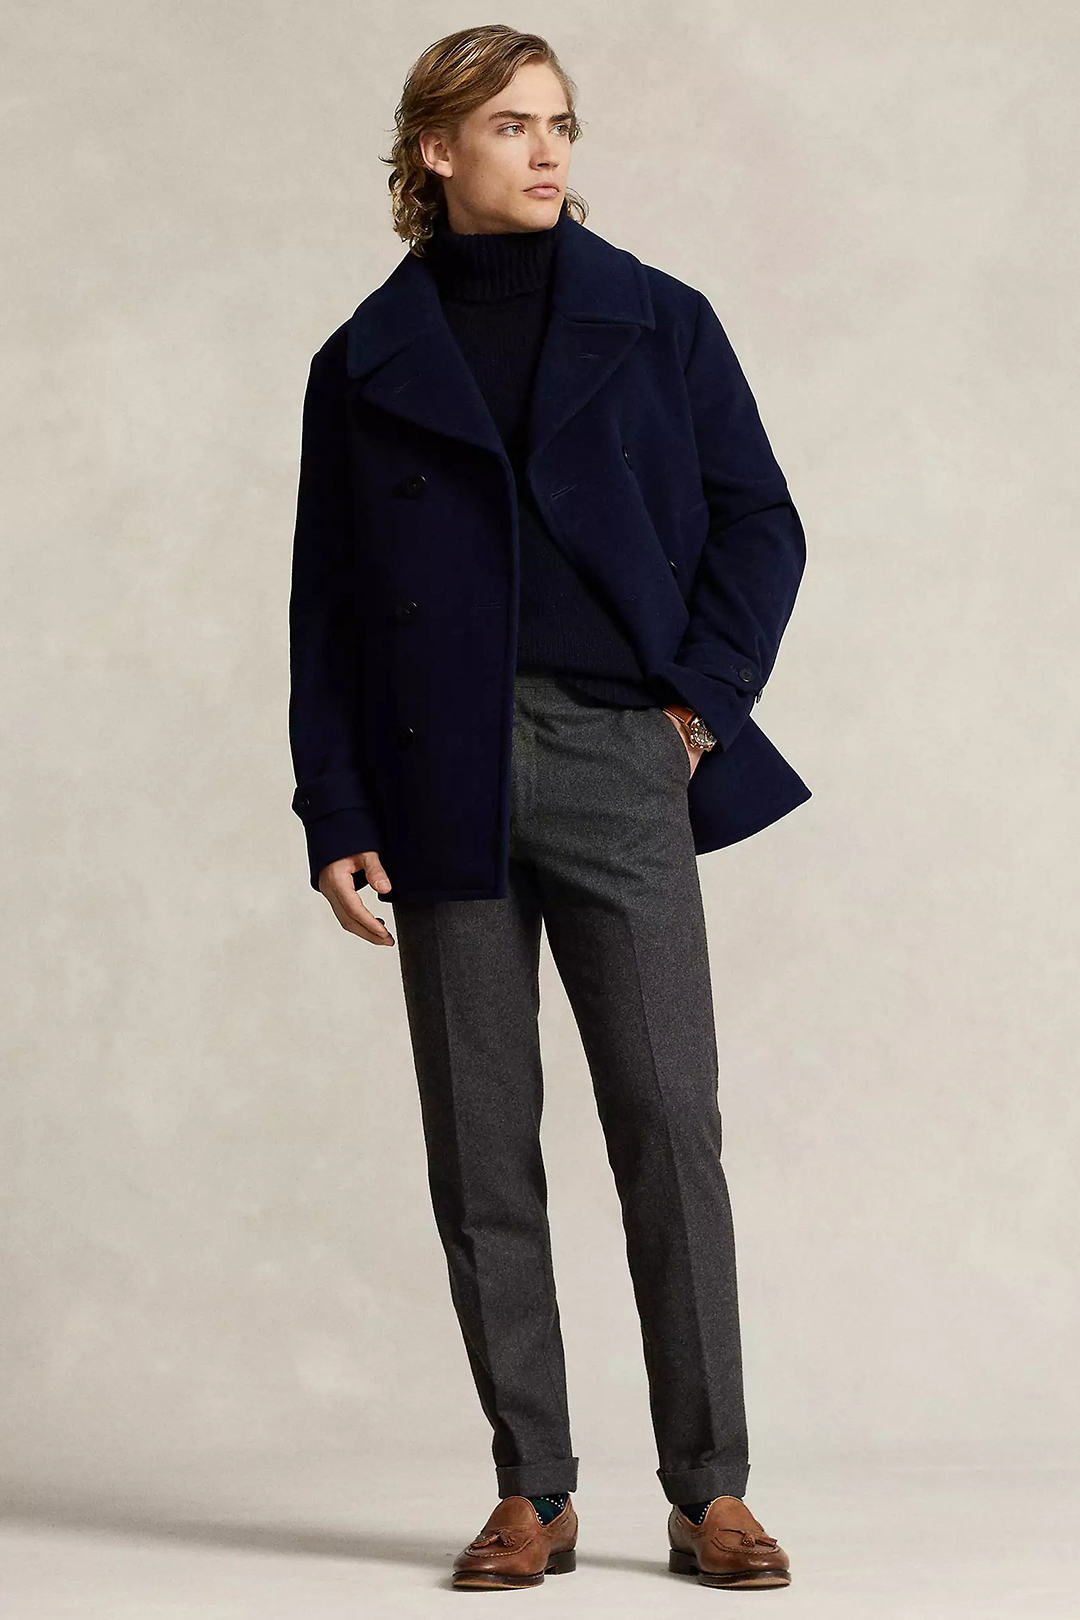 Wear a navy pea coat, navy turtleneck, charcoal dress pants, and brown leather loafers